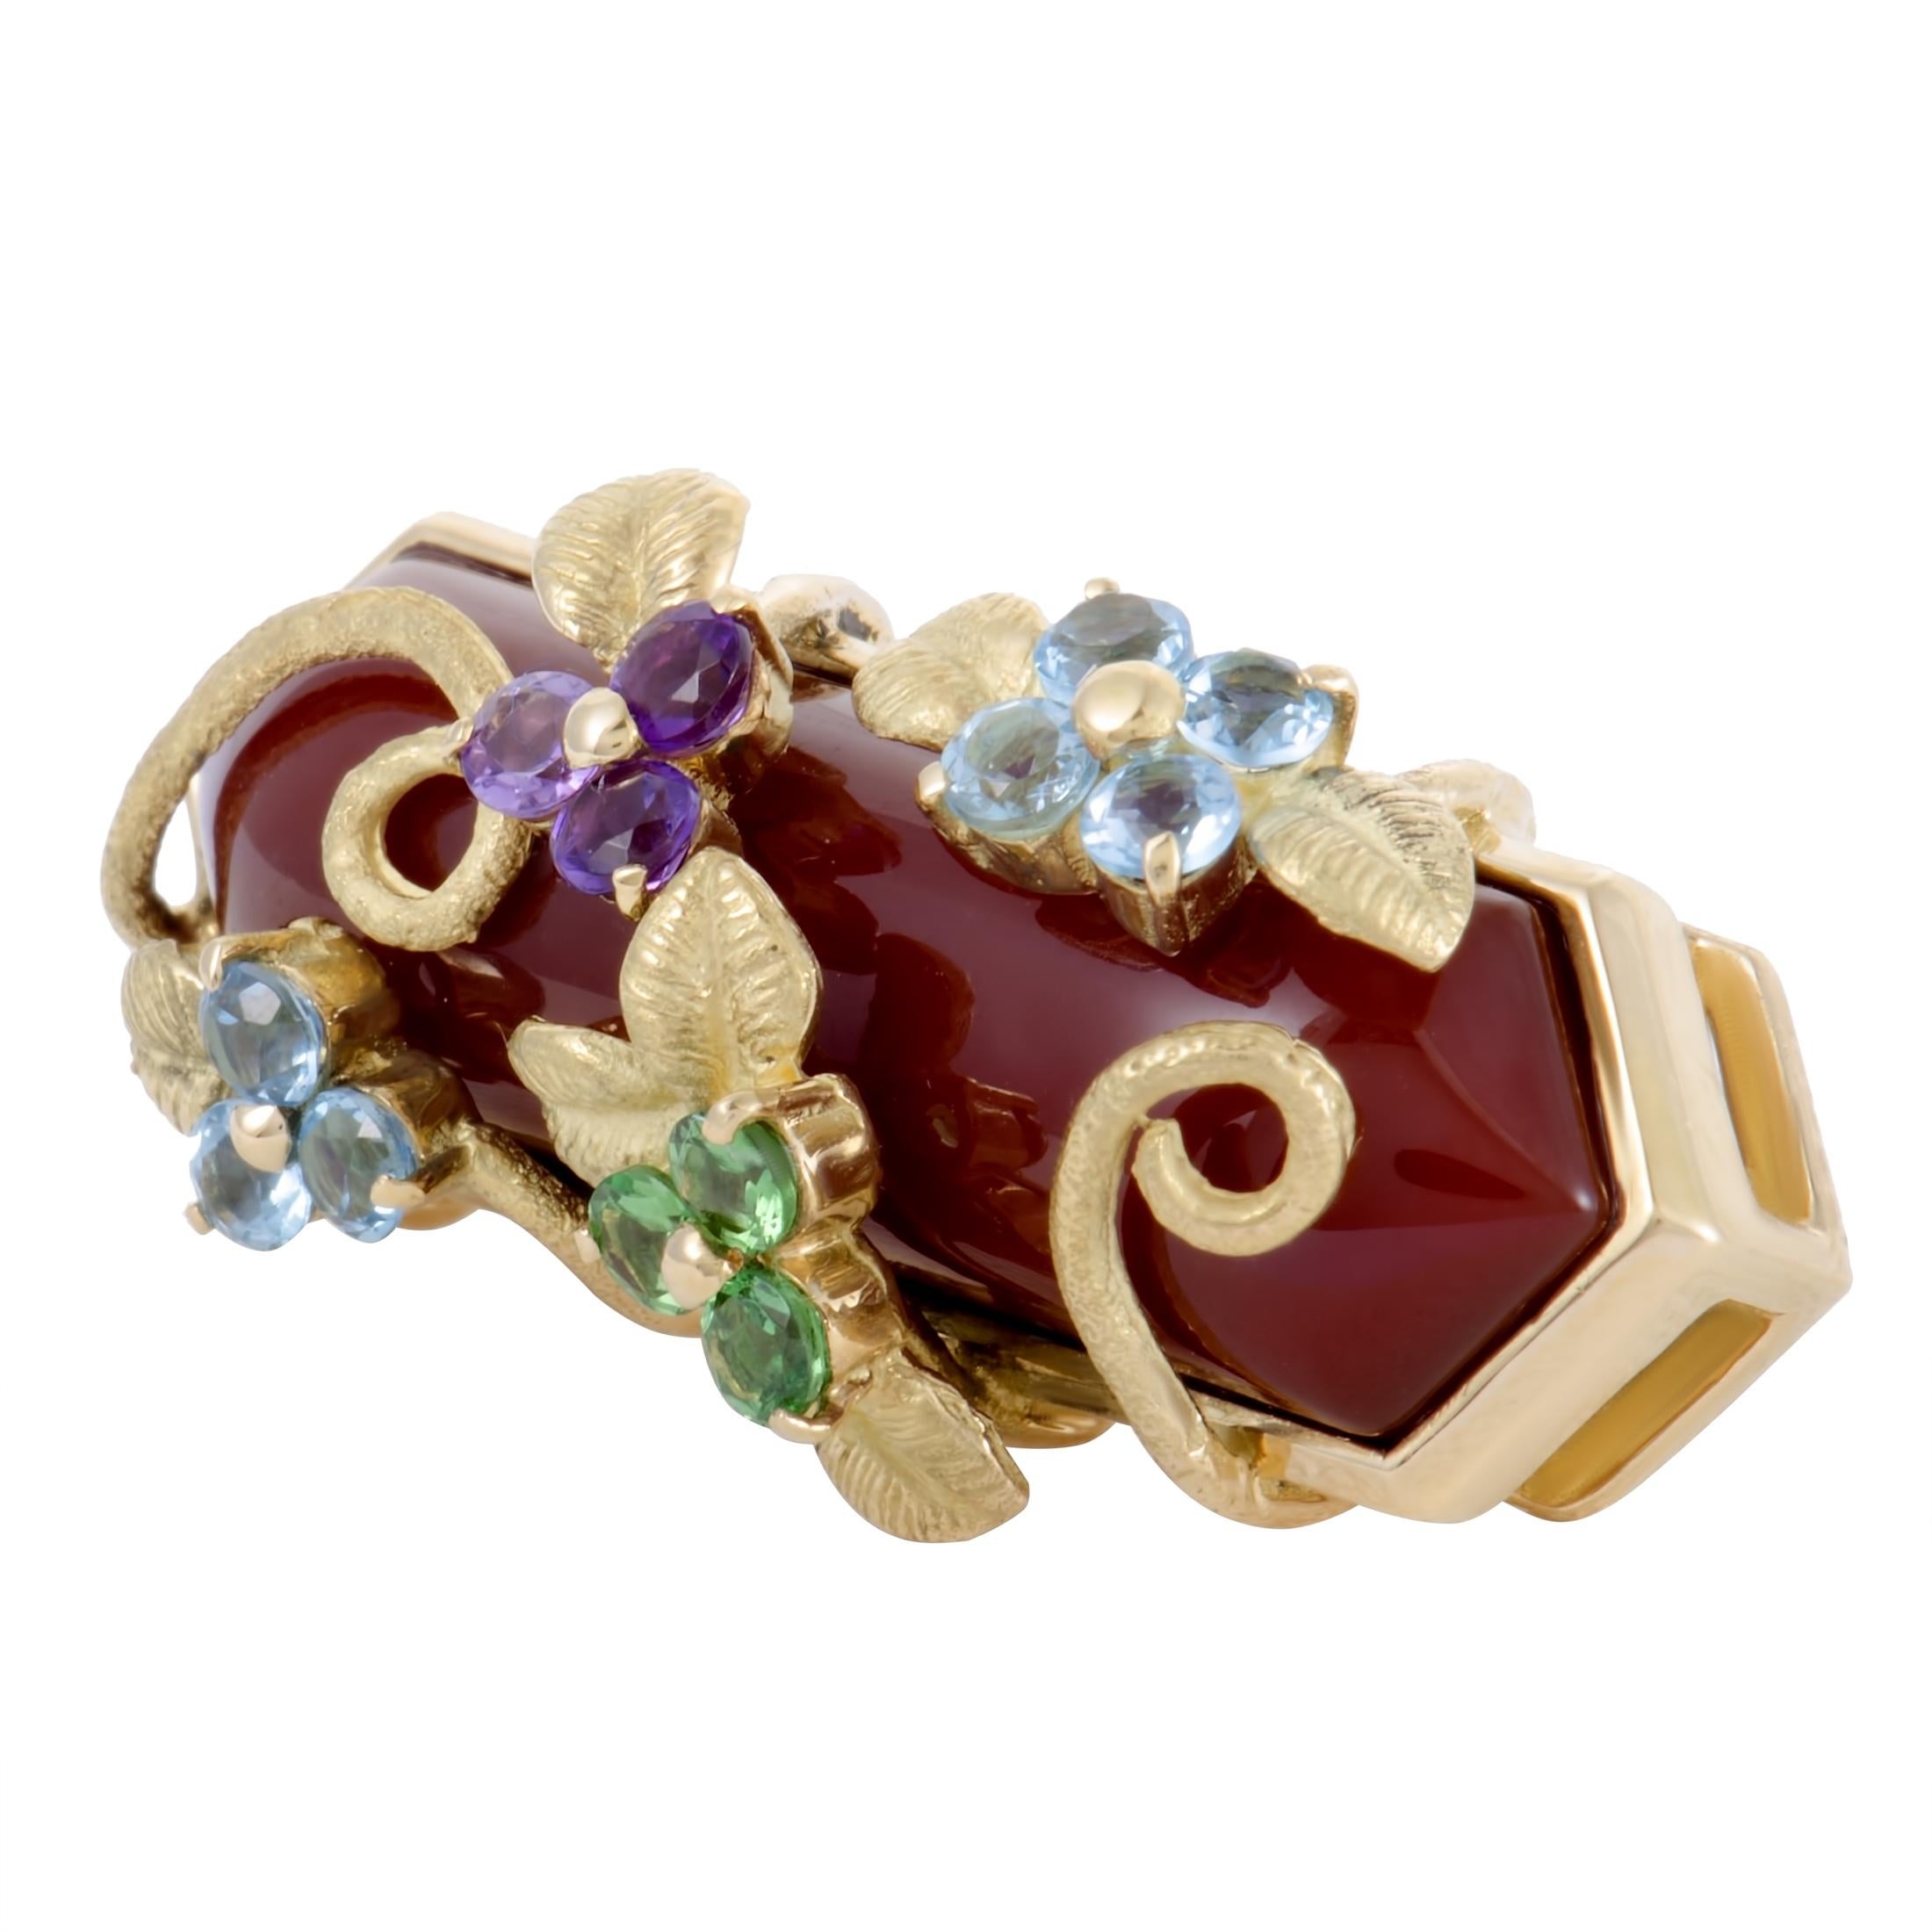 Alluringly graceful design is marvelously presented in enchanting 18K yellow gold in this sublime brooch that boasts vibrant décor, comprised of jasper, topaz, tsavorite and amethyst stones.
